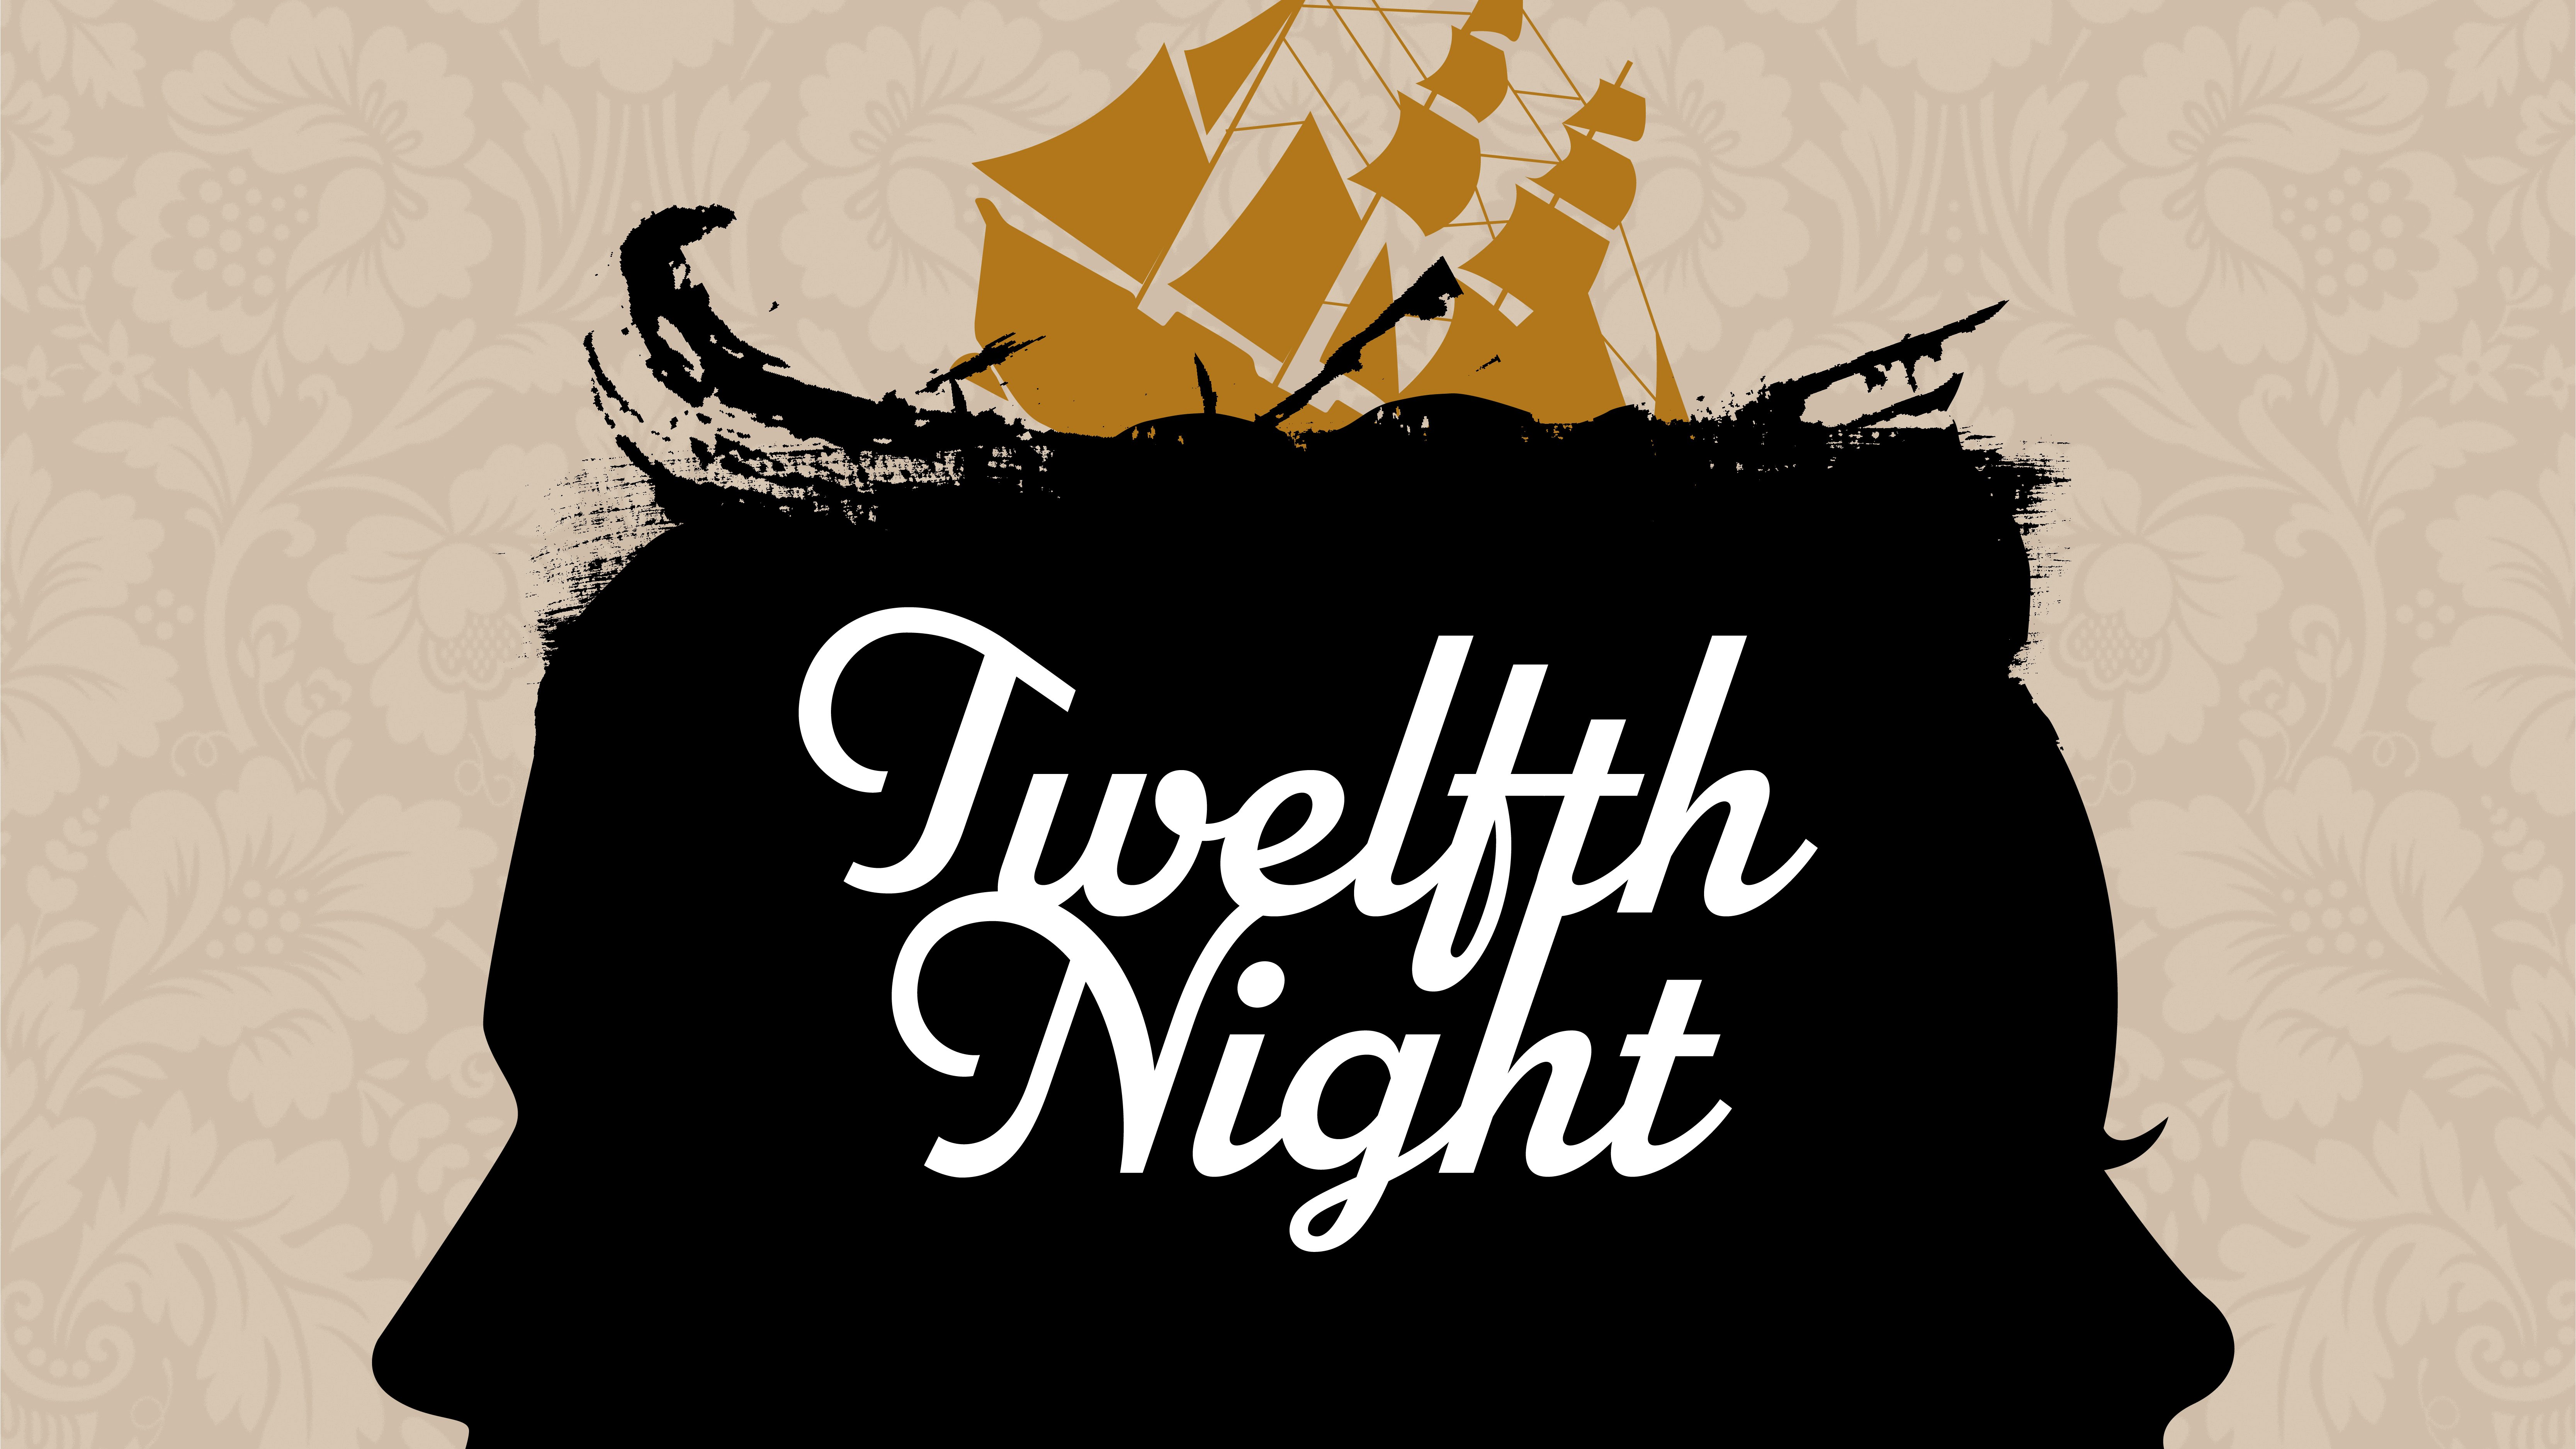 Pacifica Arts proudly presents Shakespeare's Twelfth Night and Fall Art Gallery